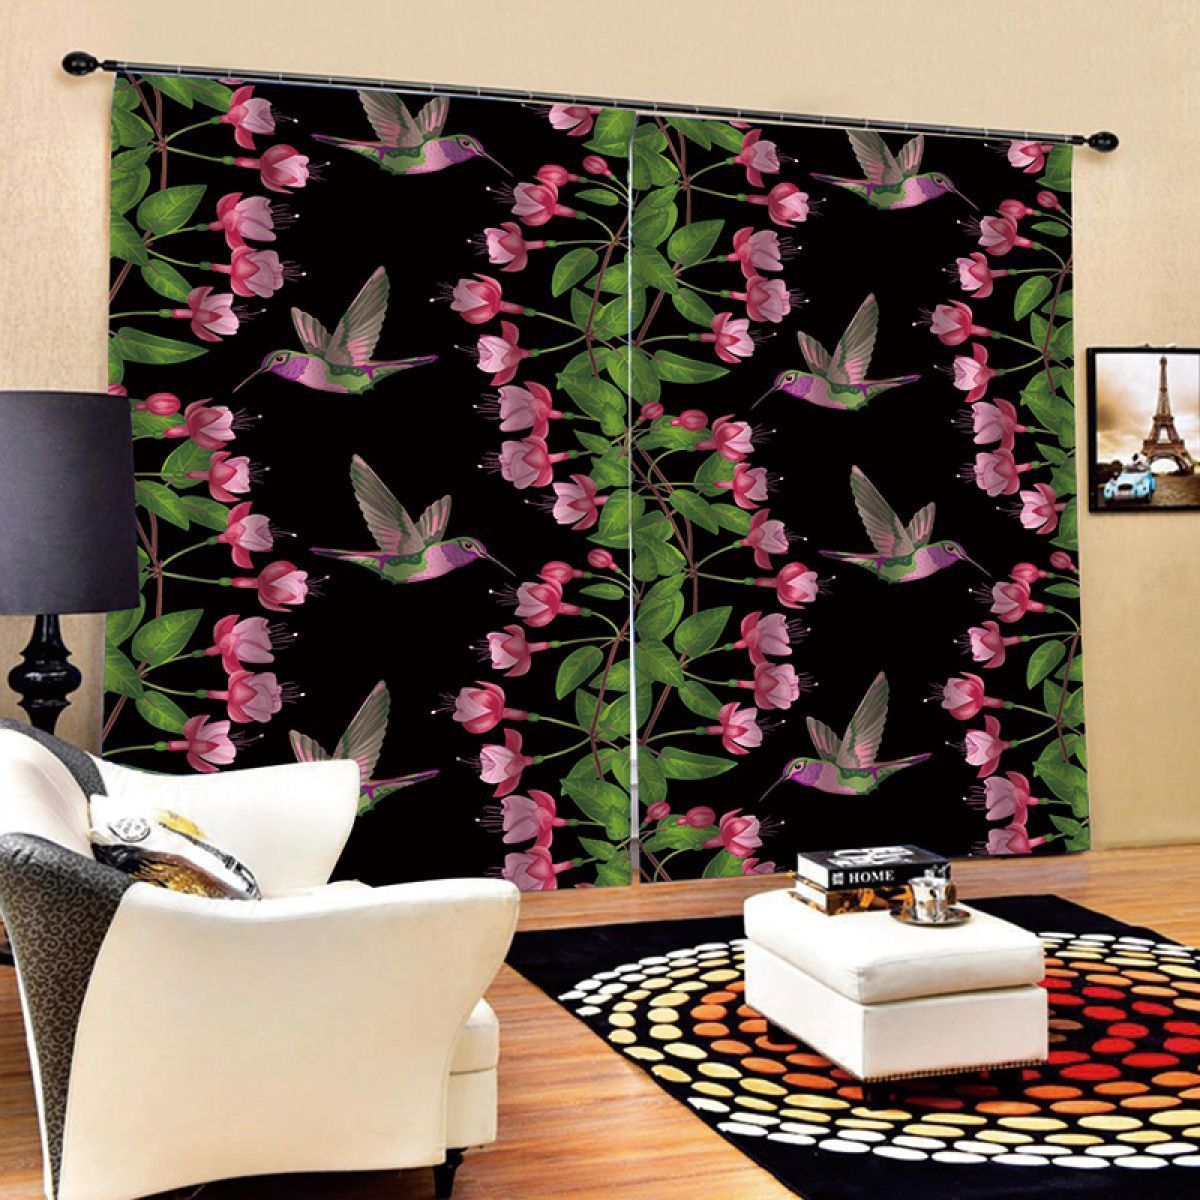 Hummingbird And Floral Printed Window Curtain Home Decor